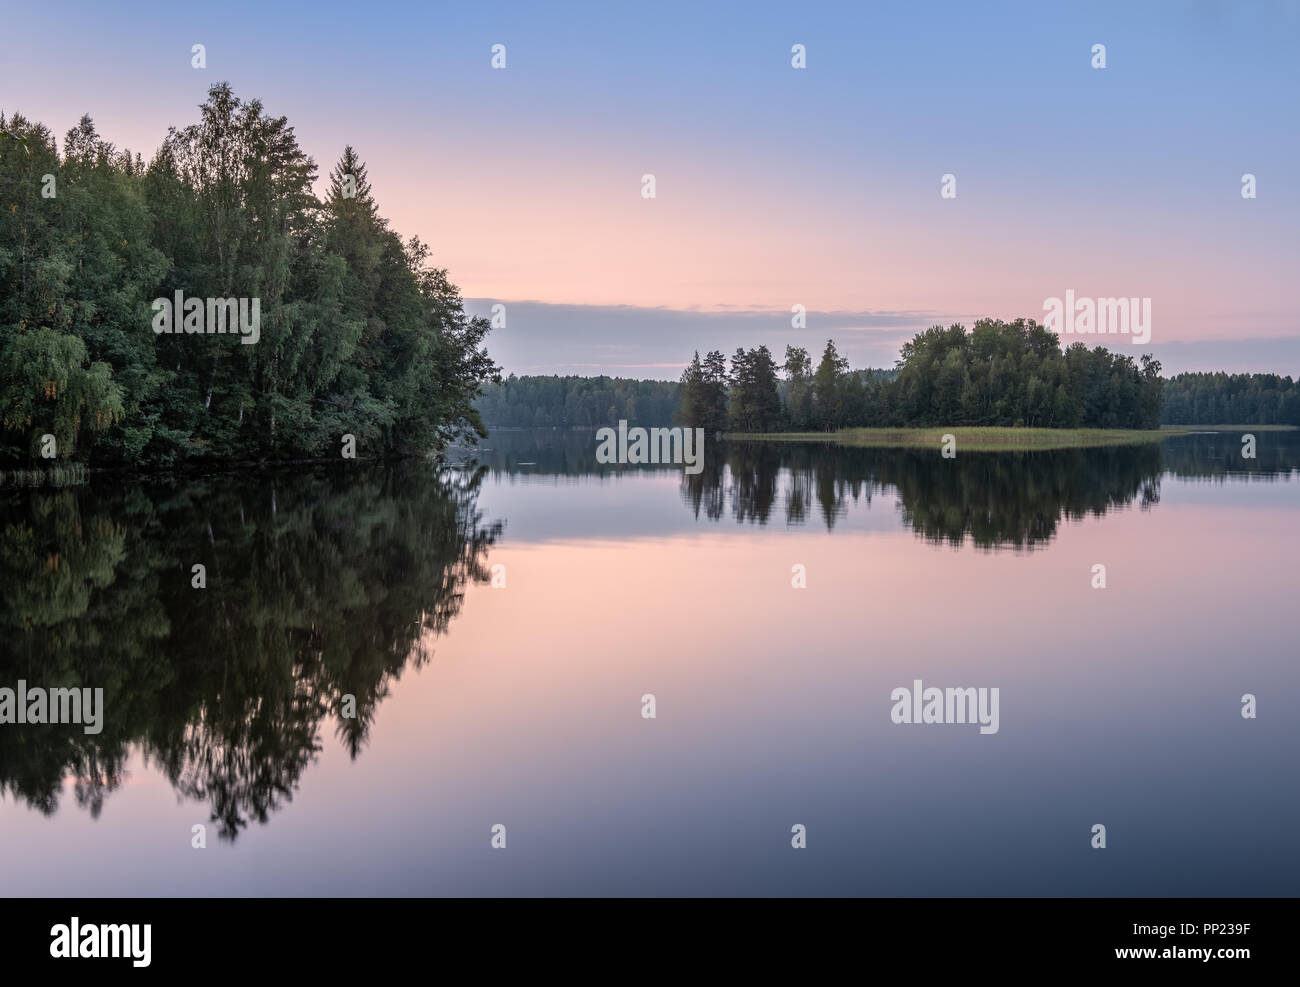 Scenic lake landscape with sunset and beautiful reflections at autumn evening in Finland. Stock Photo